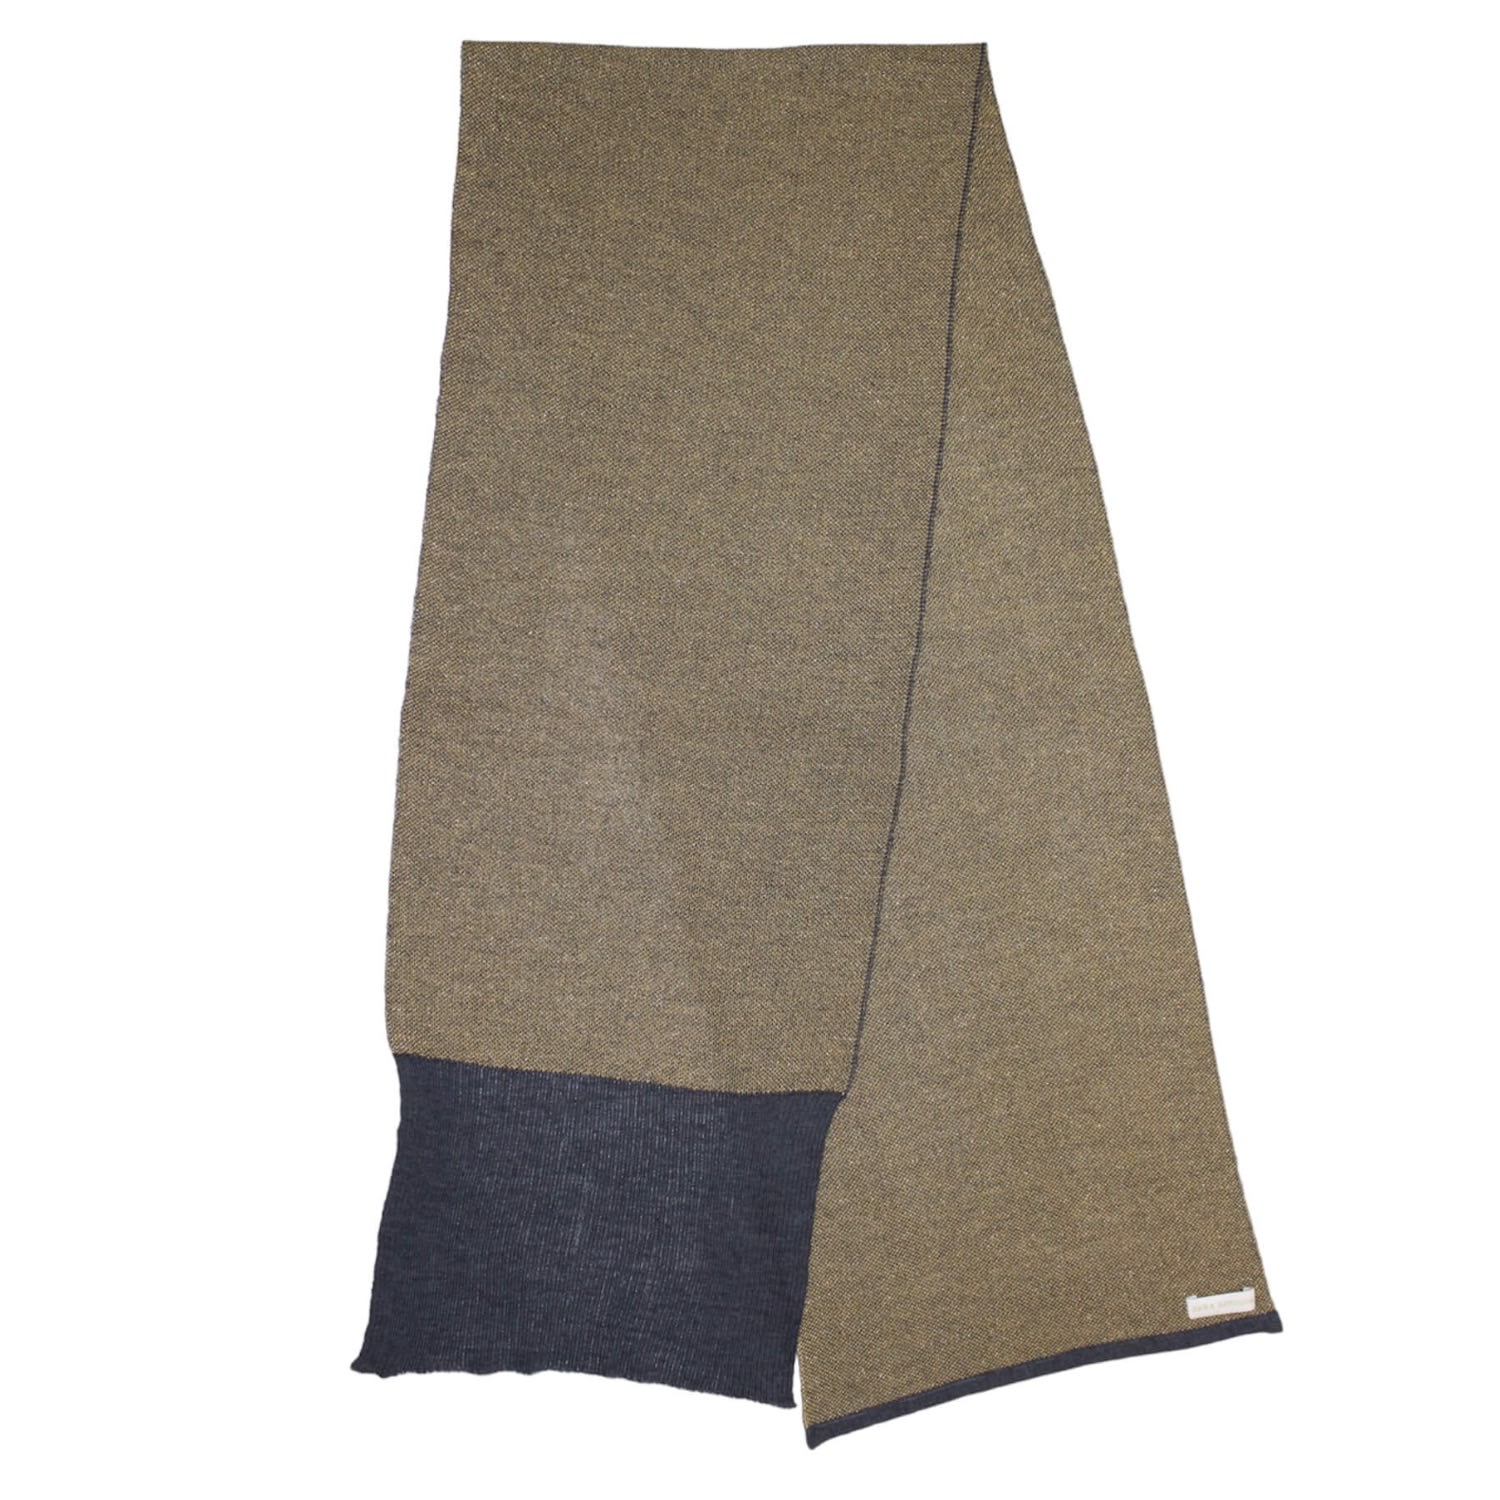 Women’s Gold / Grey Unisex Pure Scarf - Charcoal, Gold One Size Maria Aristidou